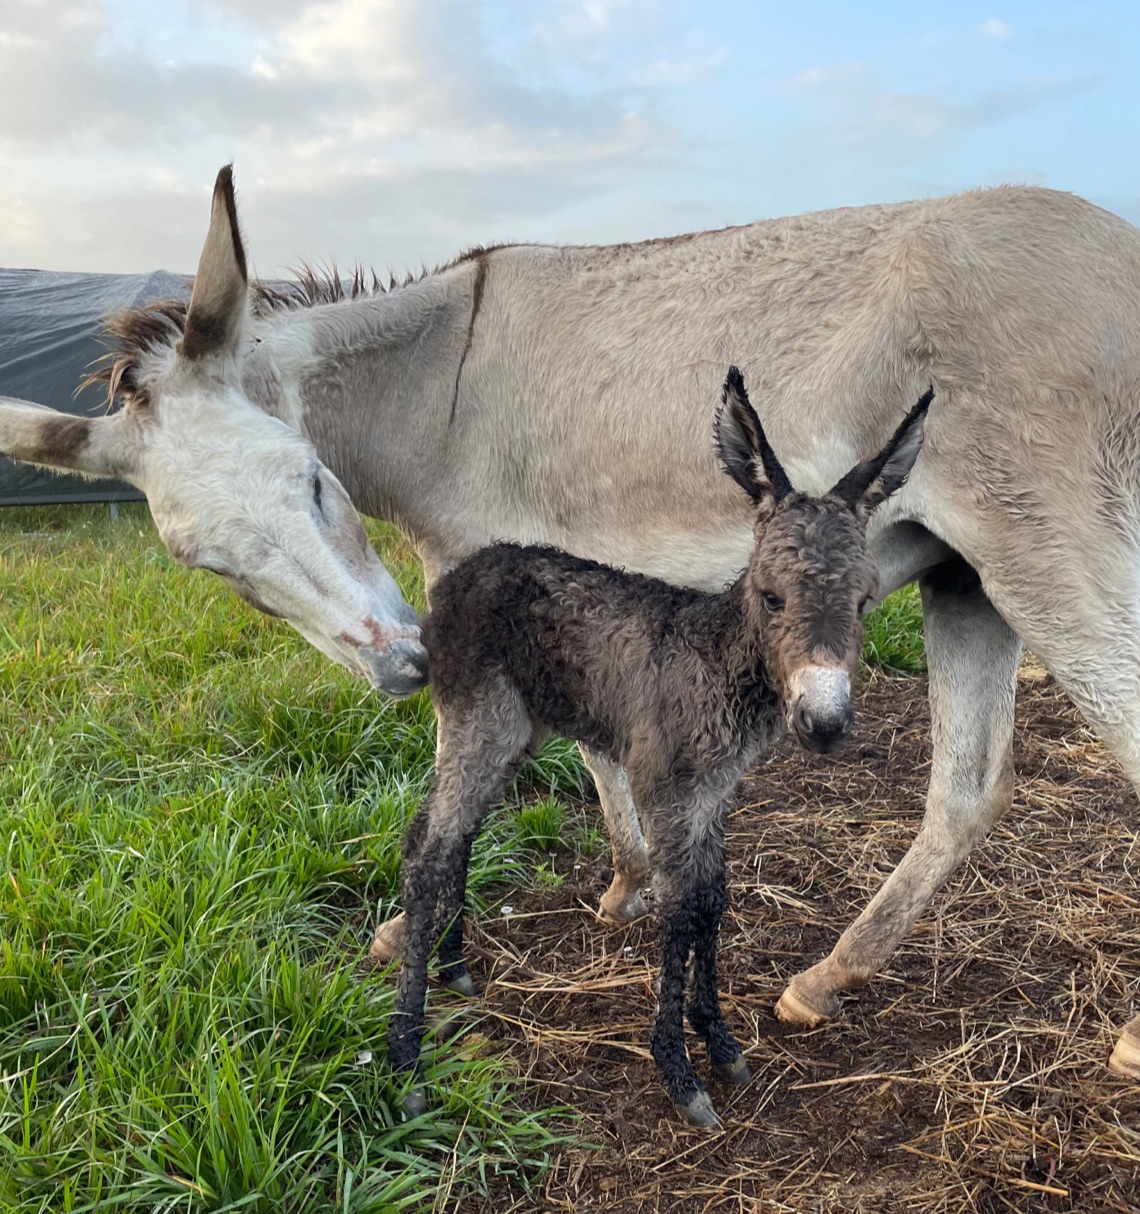 A donkey named Josephine and her baby Hunter